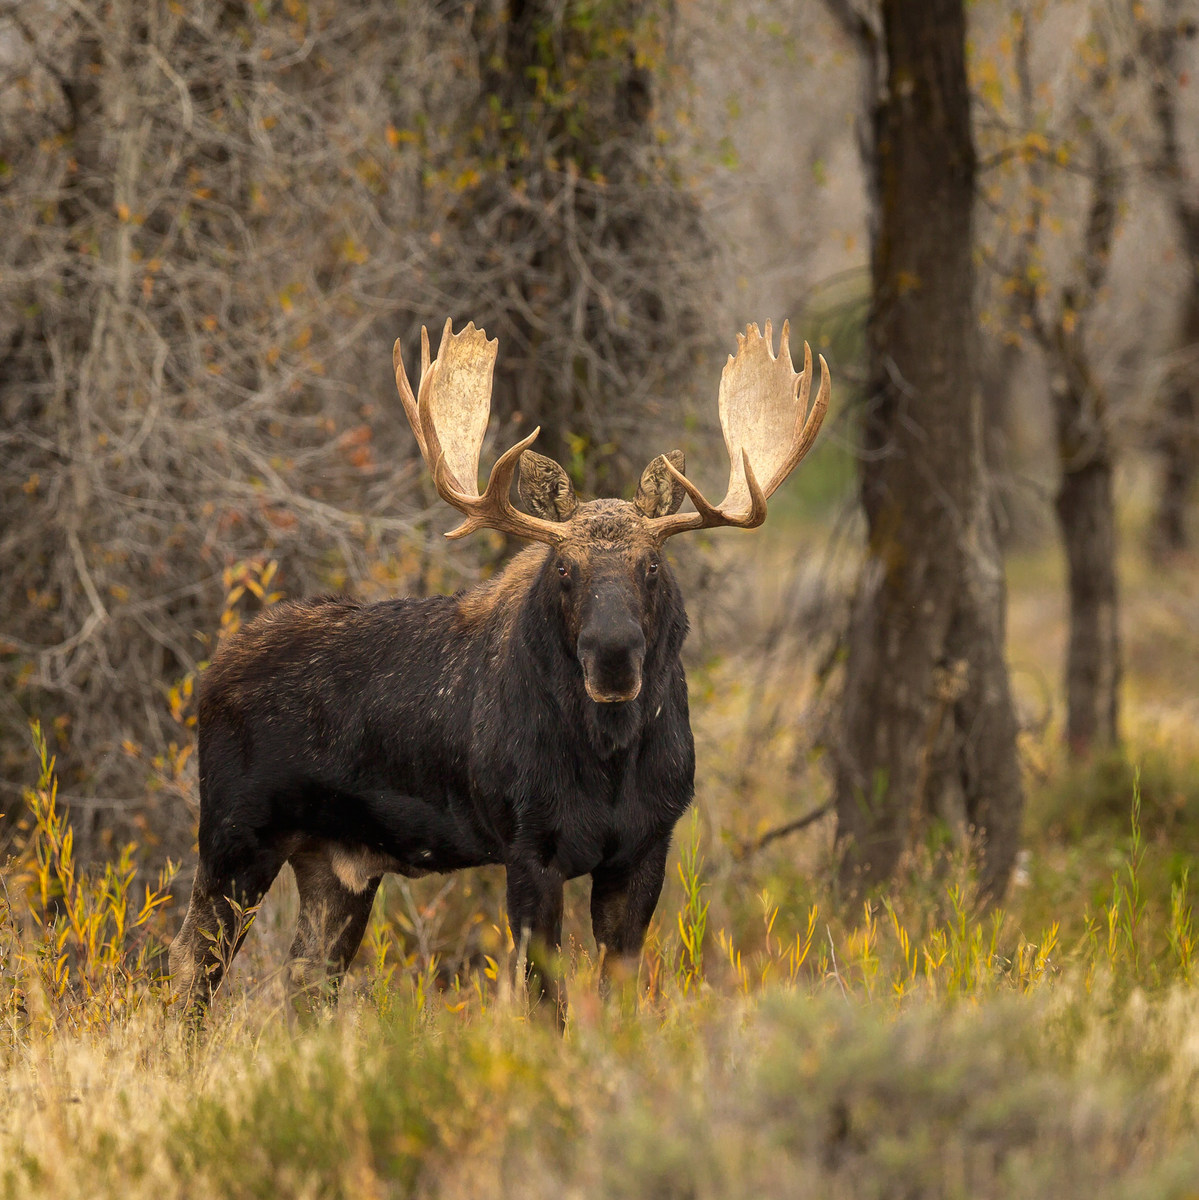 A Bull Moose stares me down